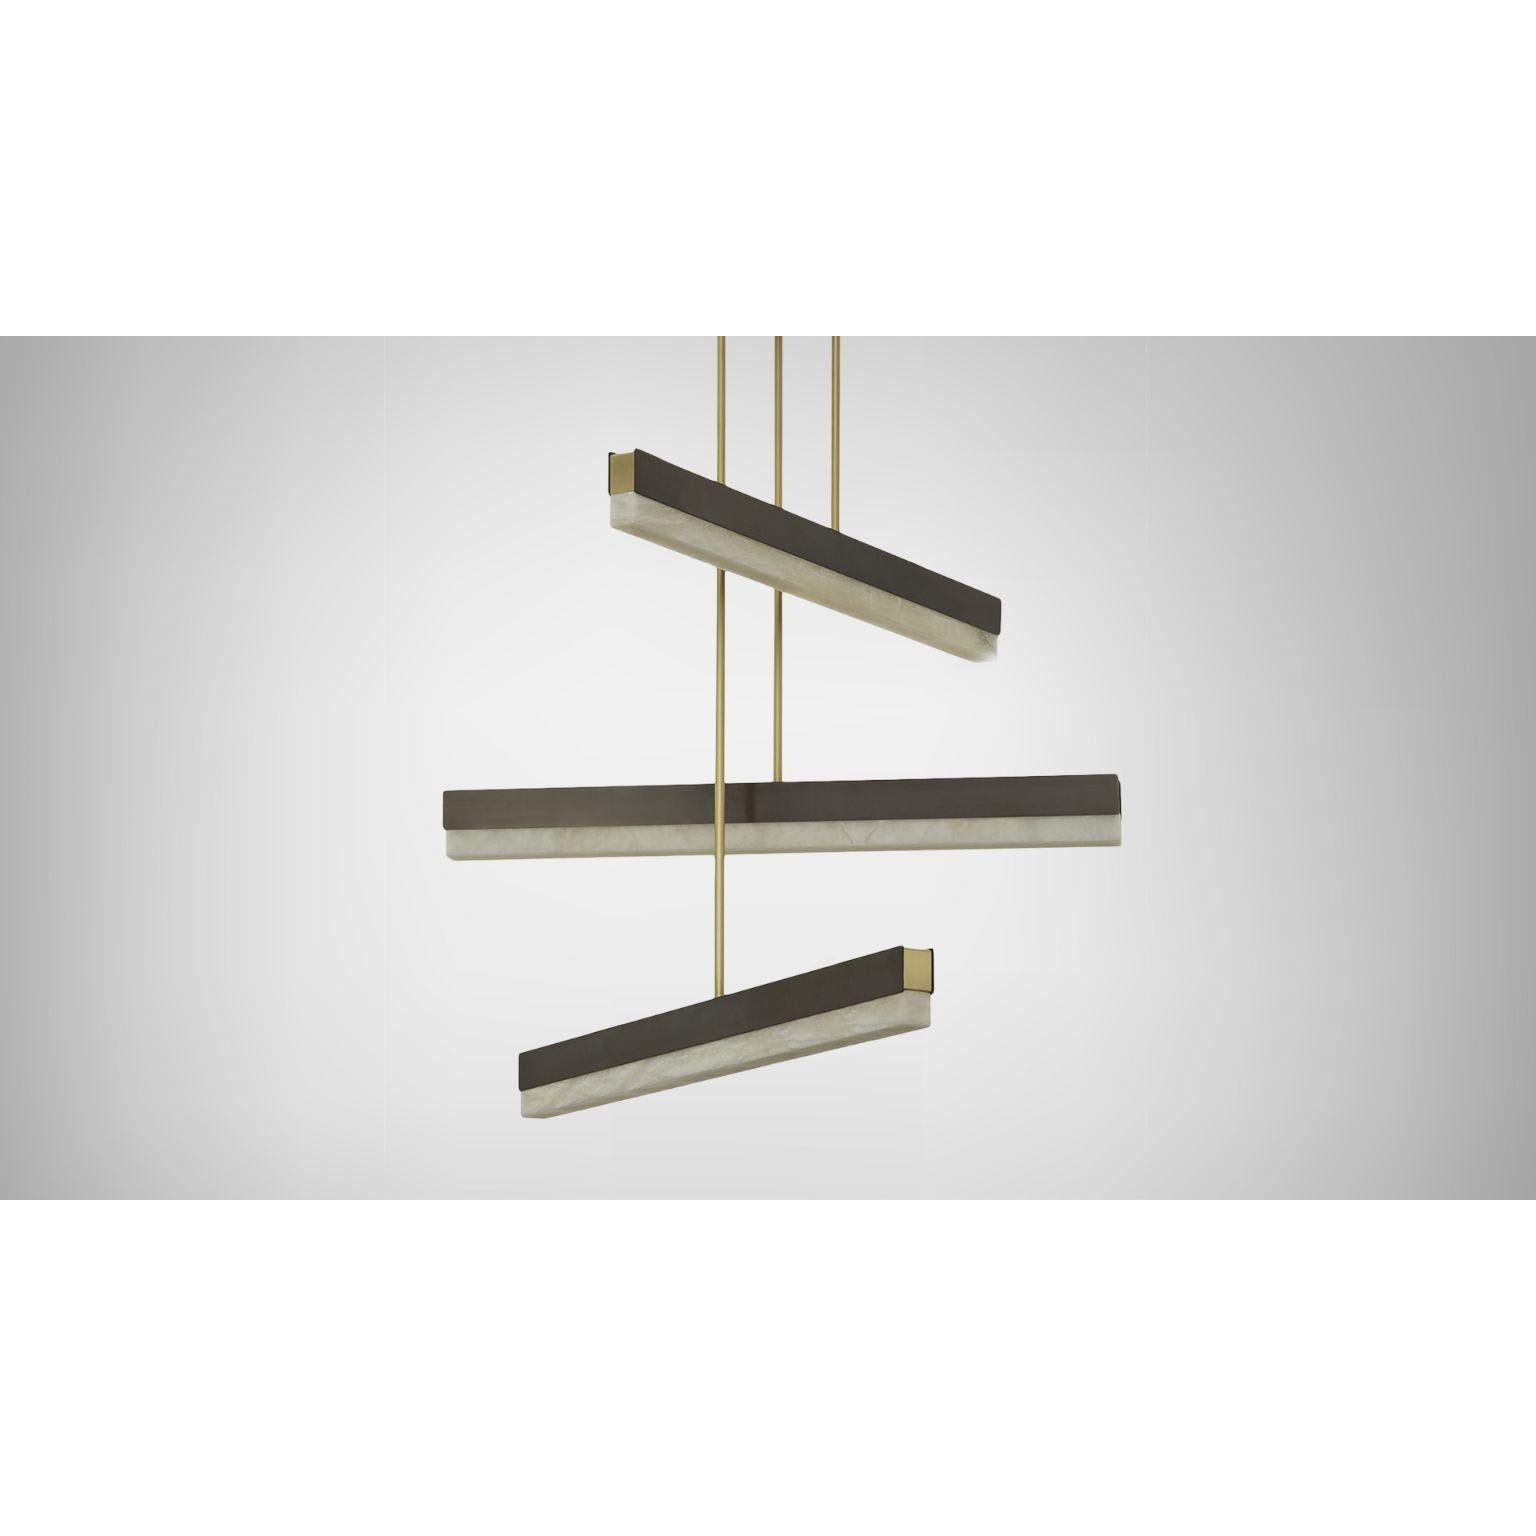 Medium Artés collective lamp by CTO Lighting.
Materials: bronze with satin brass details and honed alabaster.
Dimensions: 90 x H, specified height needed cm.

All our lamps can be wired according to each country. If sold to the USA it will be wired